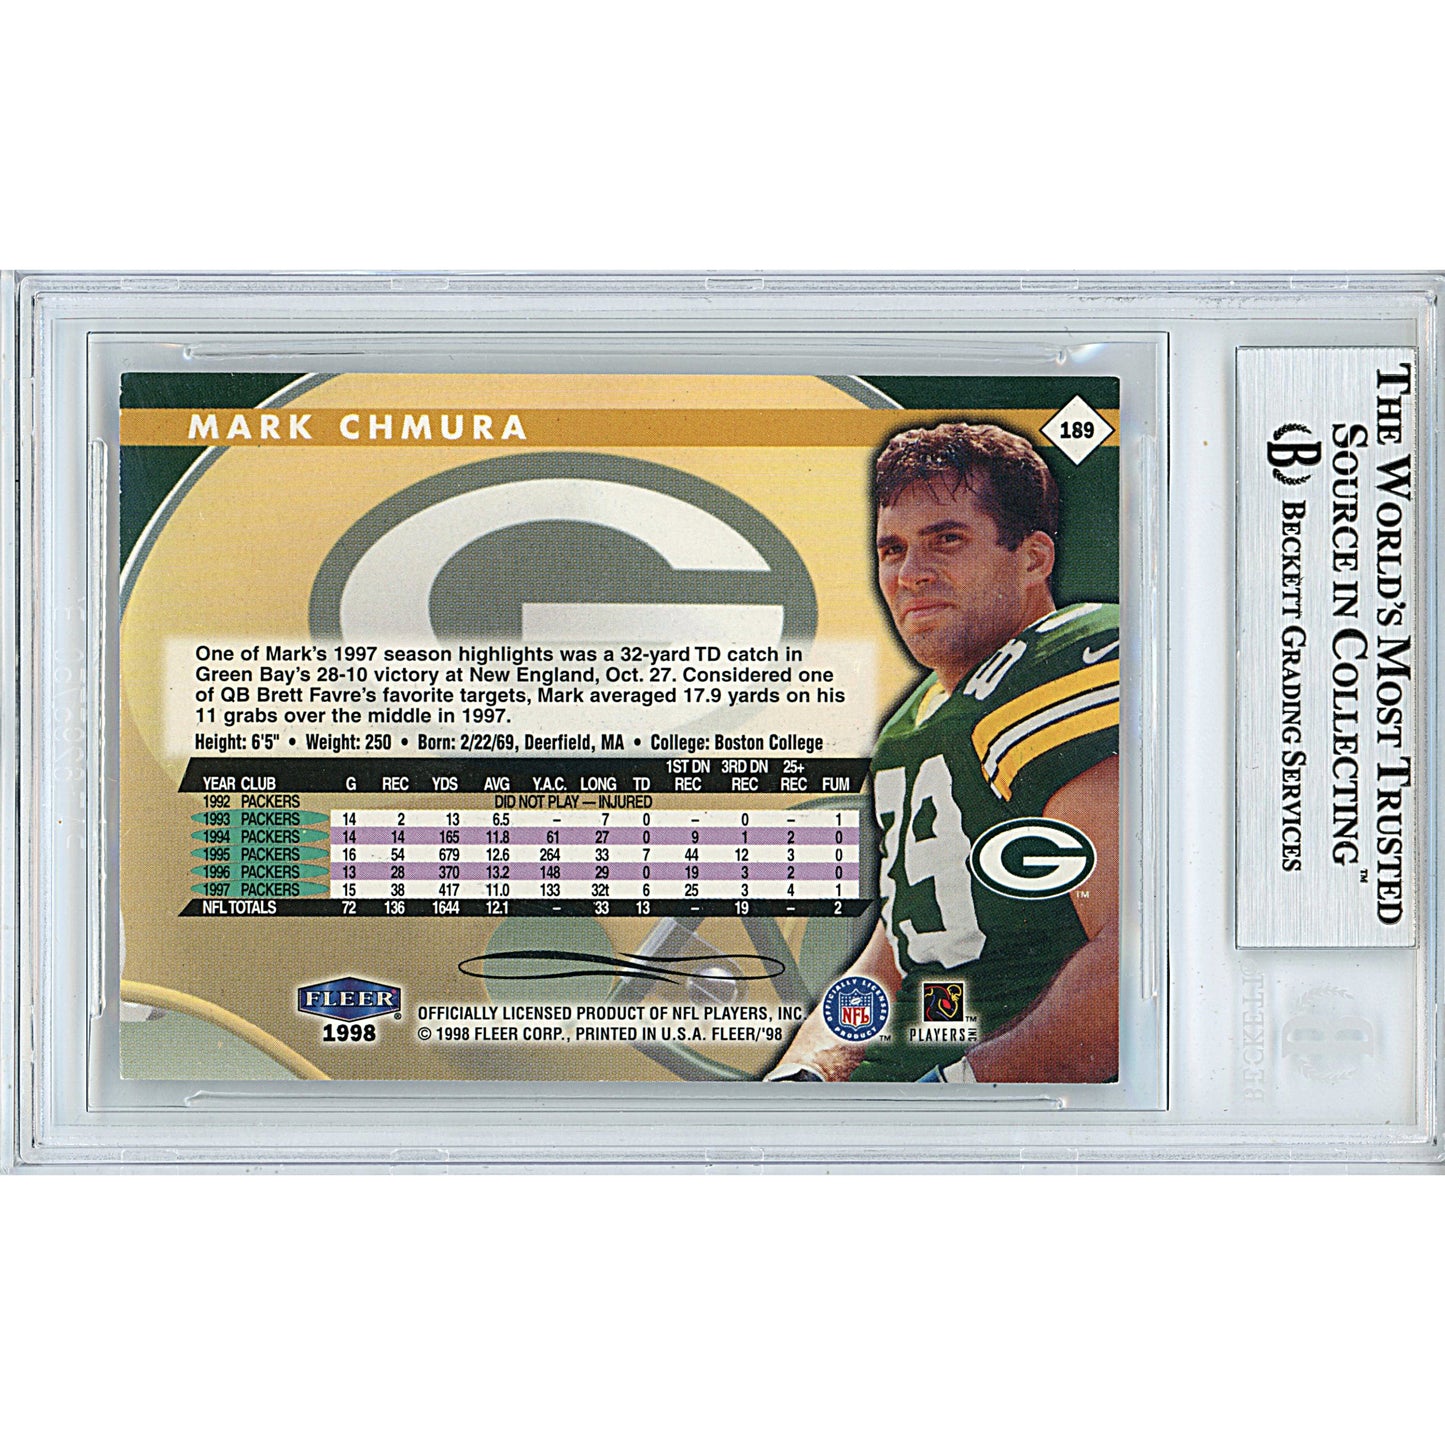 Footballs- Autographed- Mark Chmura Signed Green Bay Packers 1998 Fleer Tradition Football Card Beckett BAS Authentication Slabbed 00013190448 - 102